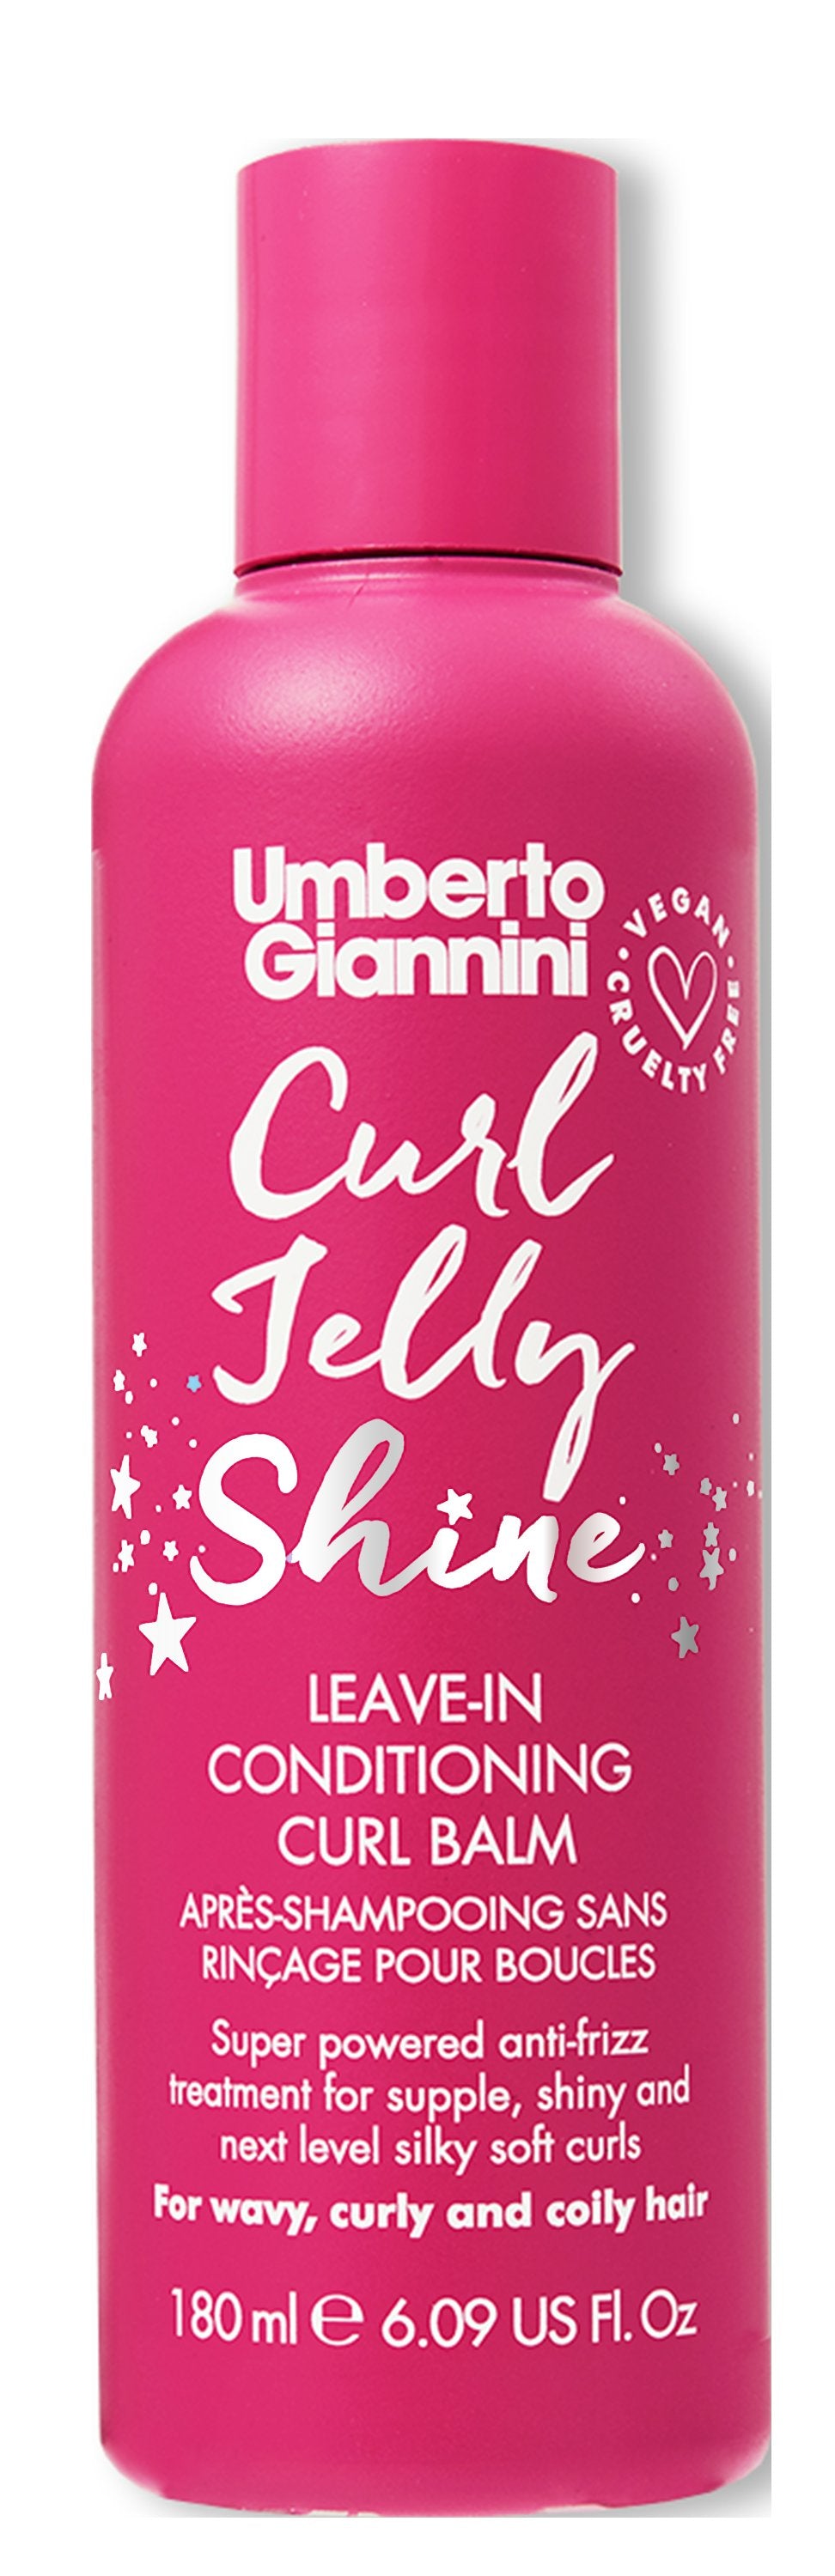 Umberto Giannini Curl Jelly Shine Leave-In Conditioner